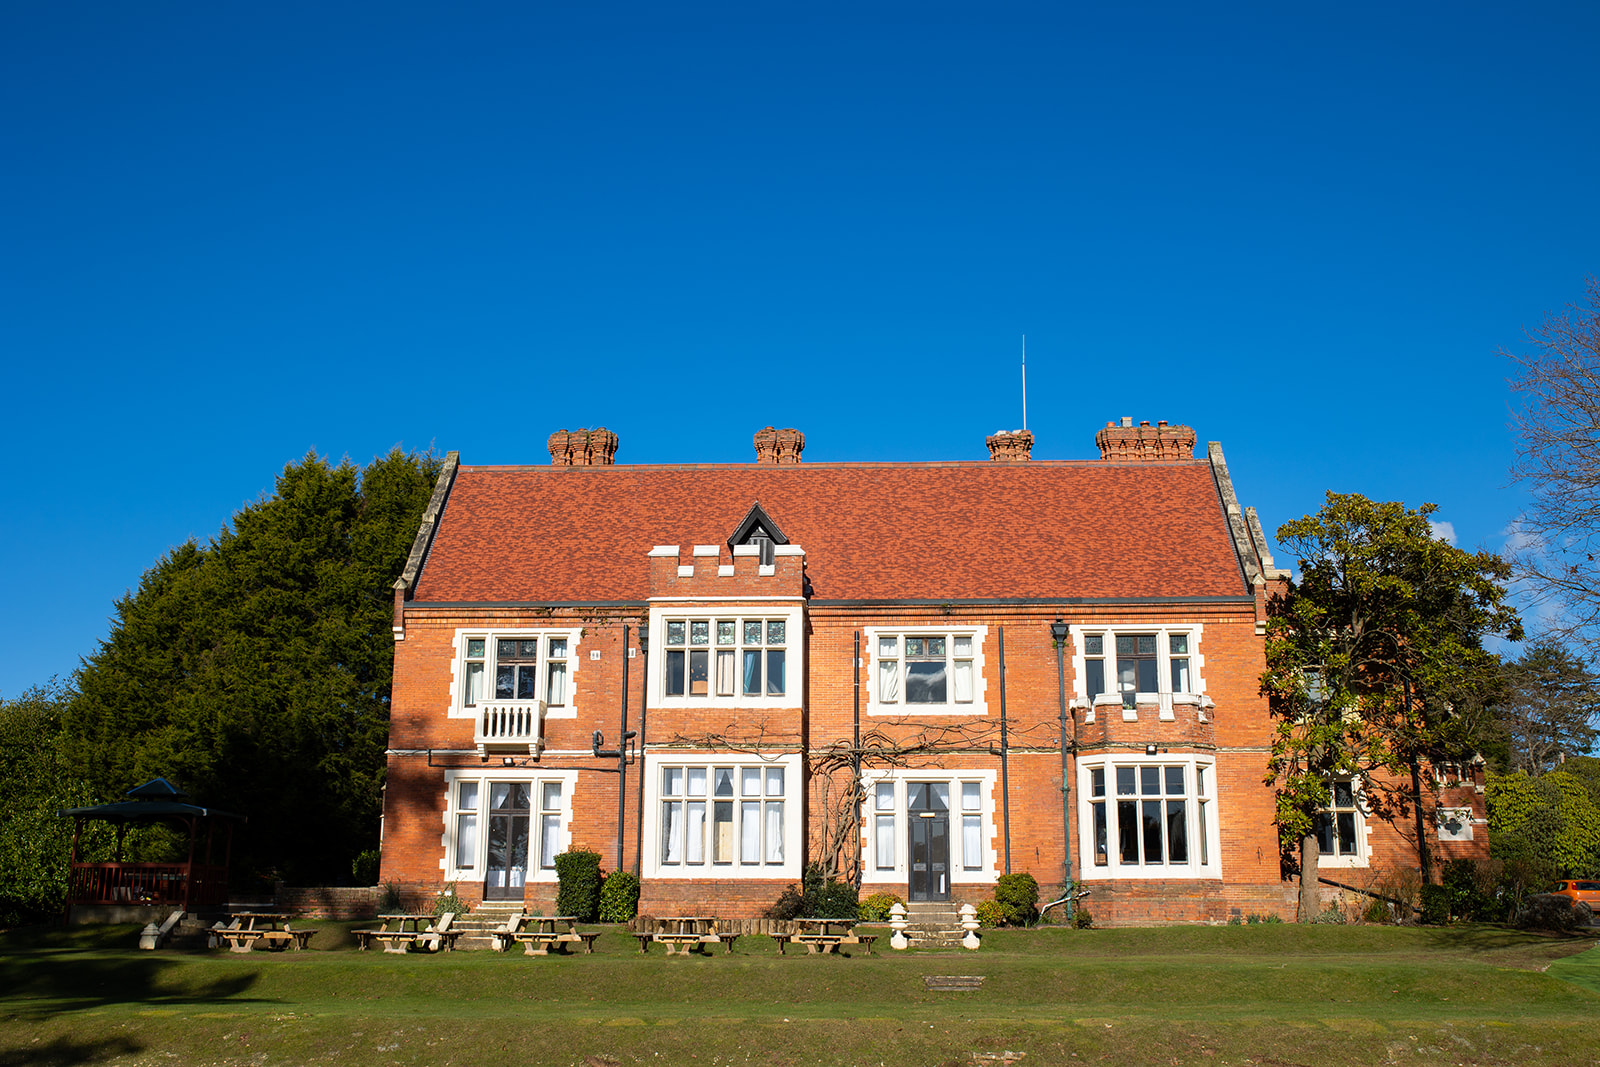 highly manor on a glorious blue sky winter wedding day